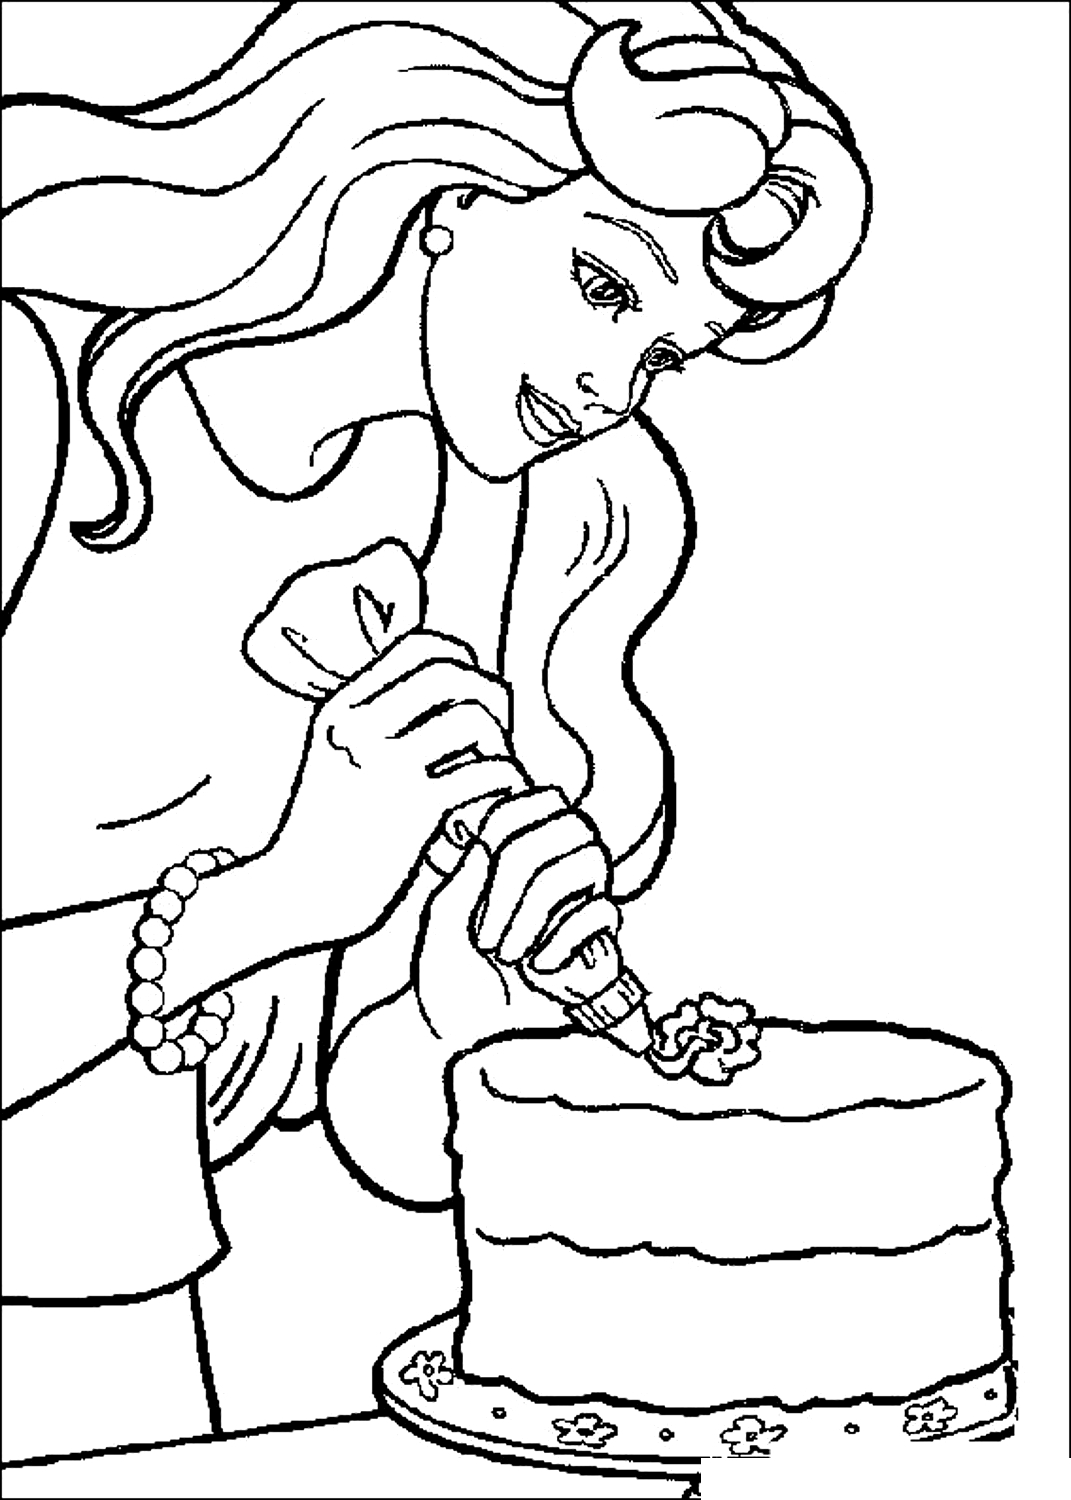 Drawing 07 from Barbie to print and coloring